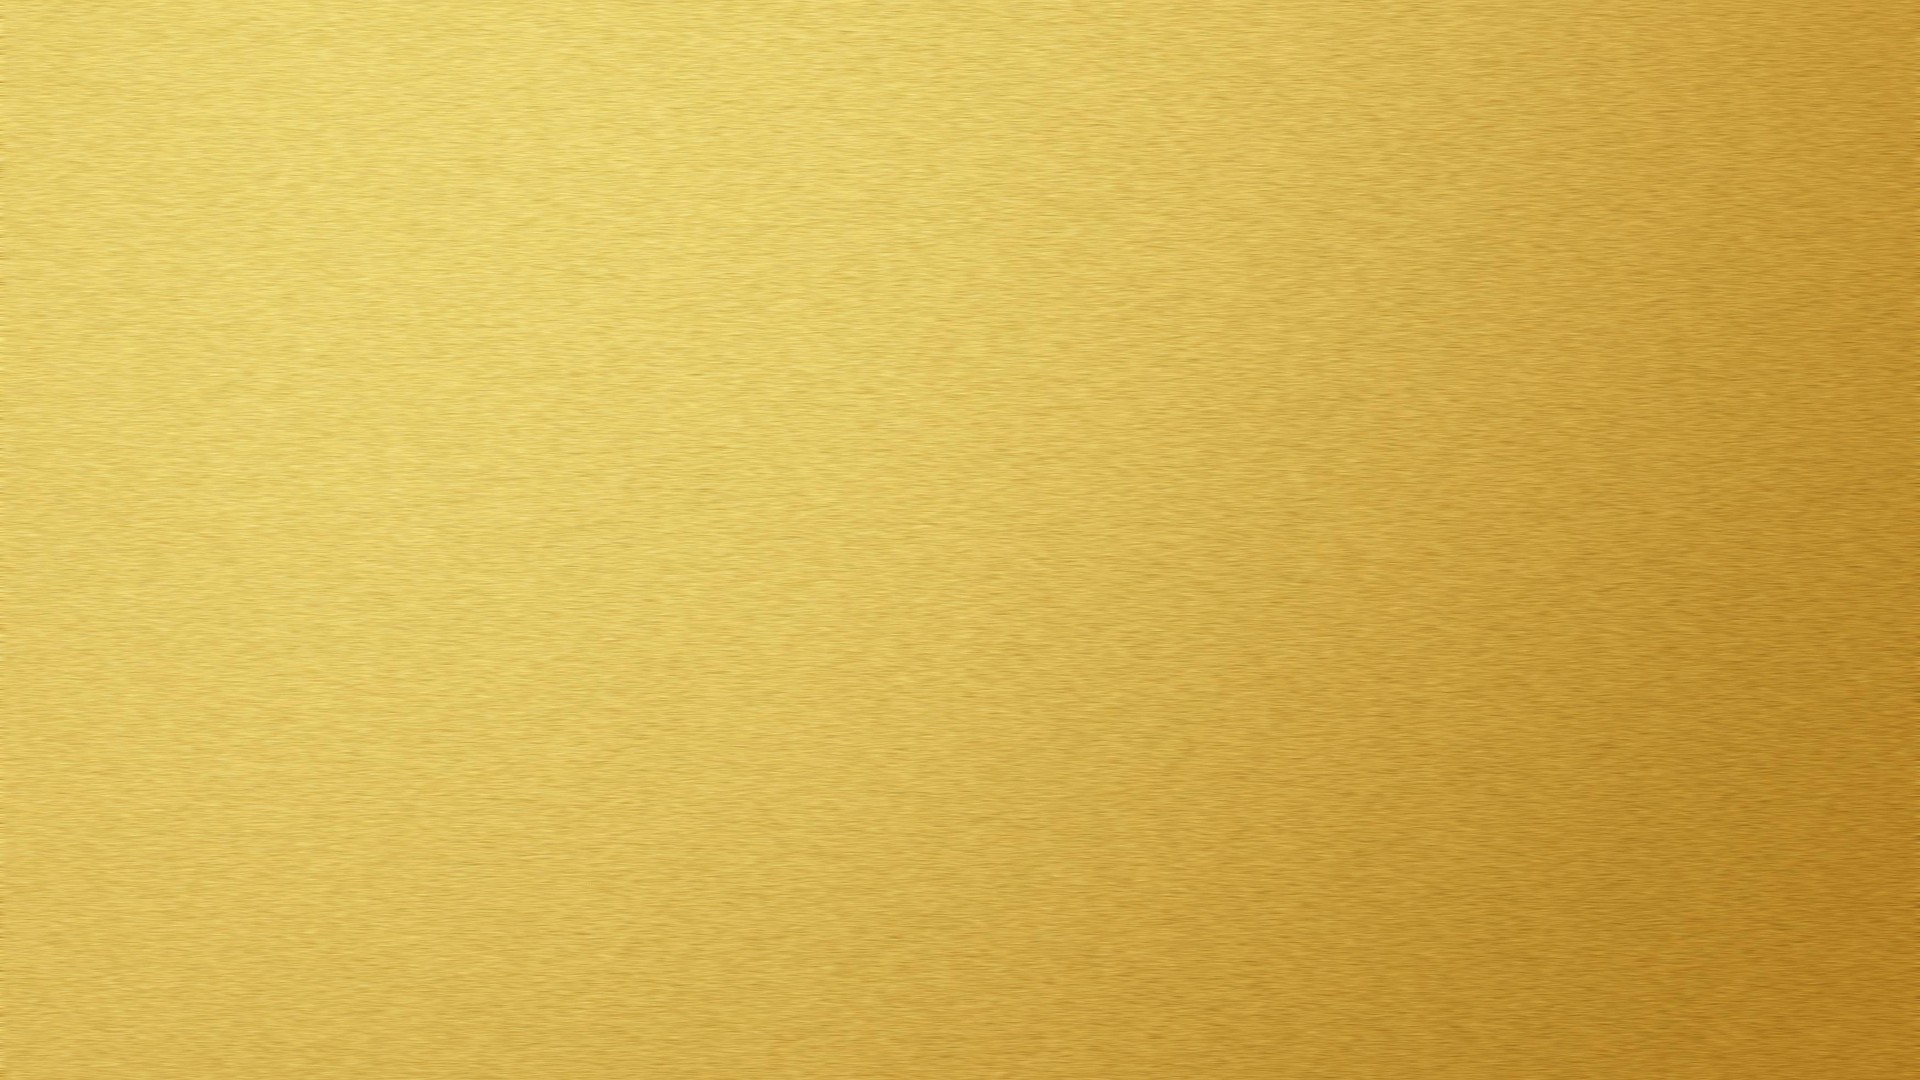 Plain Gold HD Wallpaper With Resolution 1920X1080